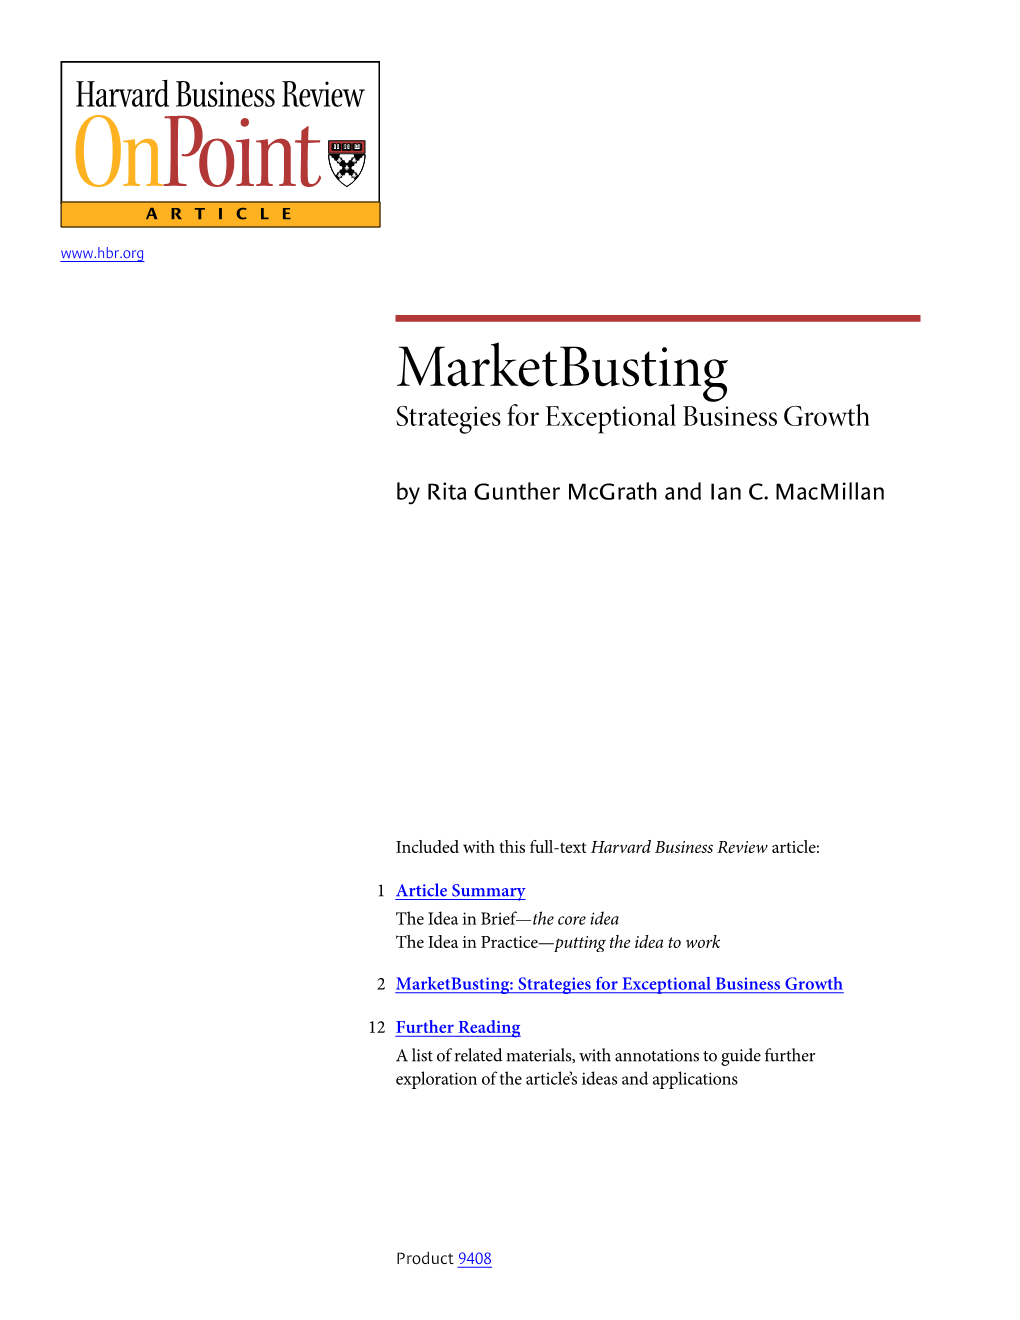 Marketbusting Strategies for Exceptional Business Growth